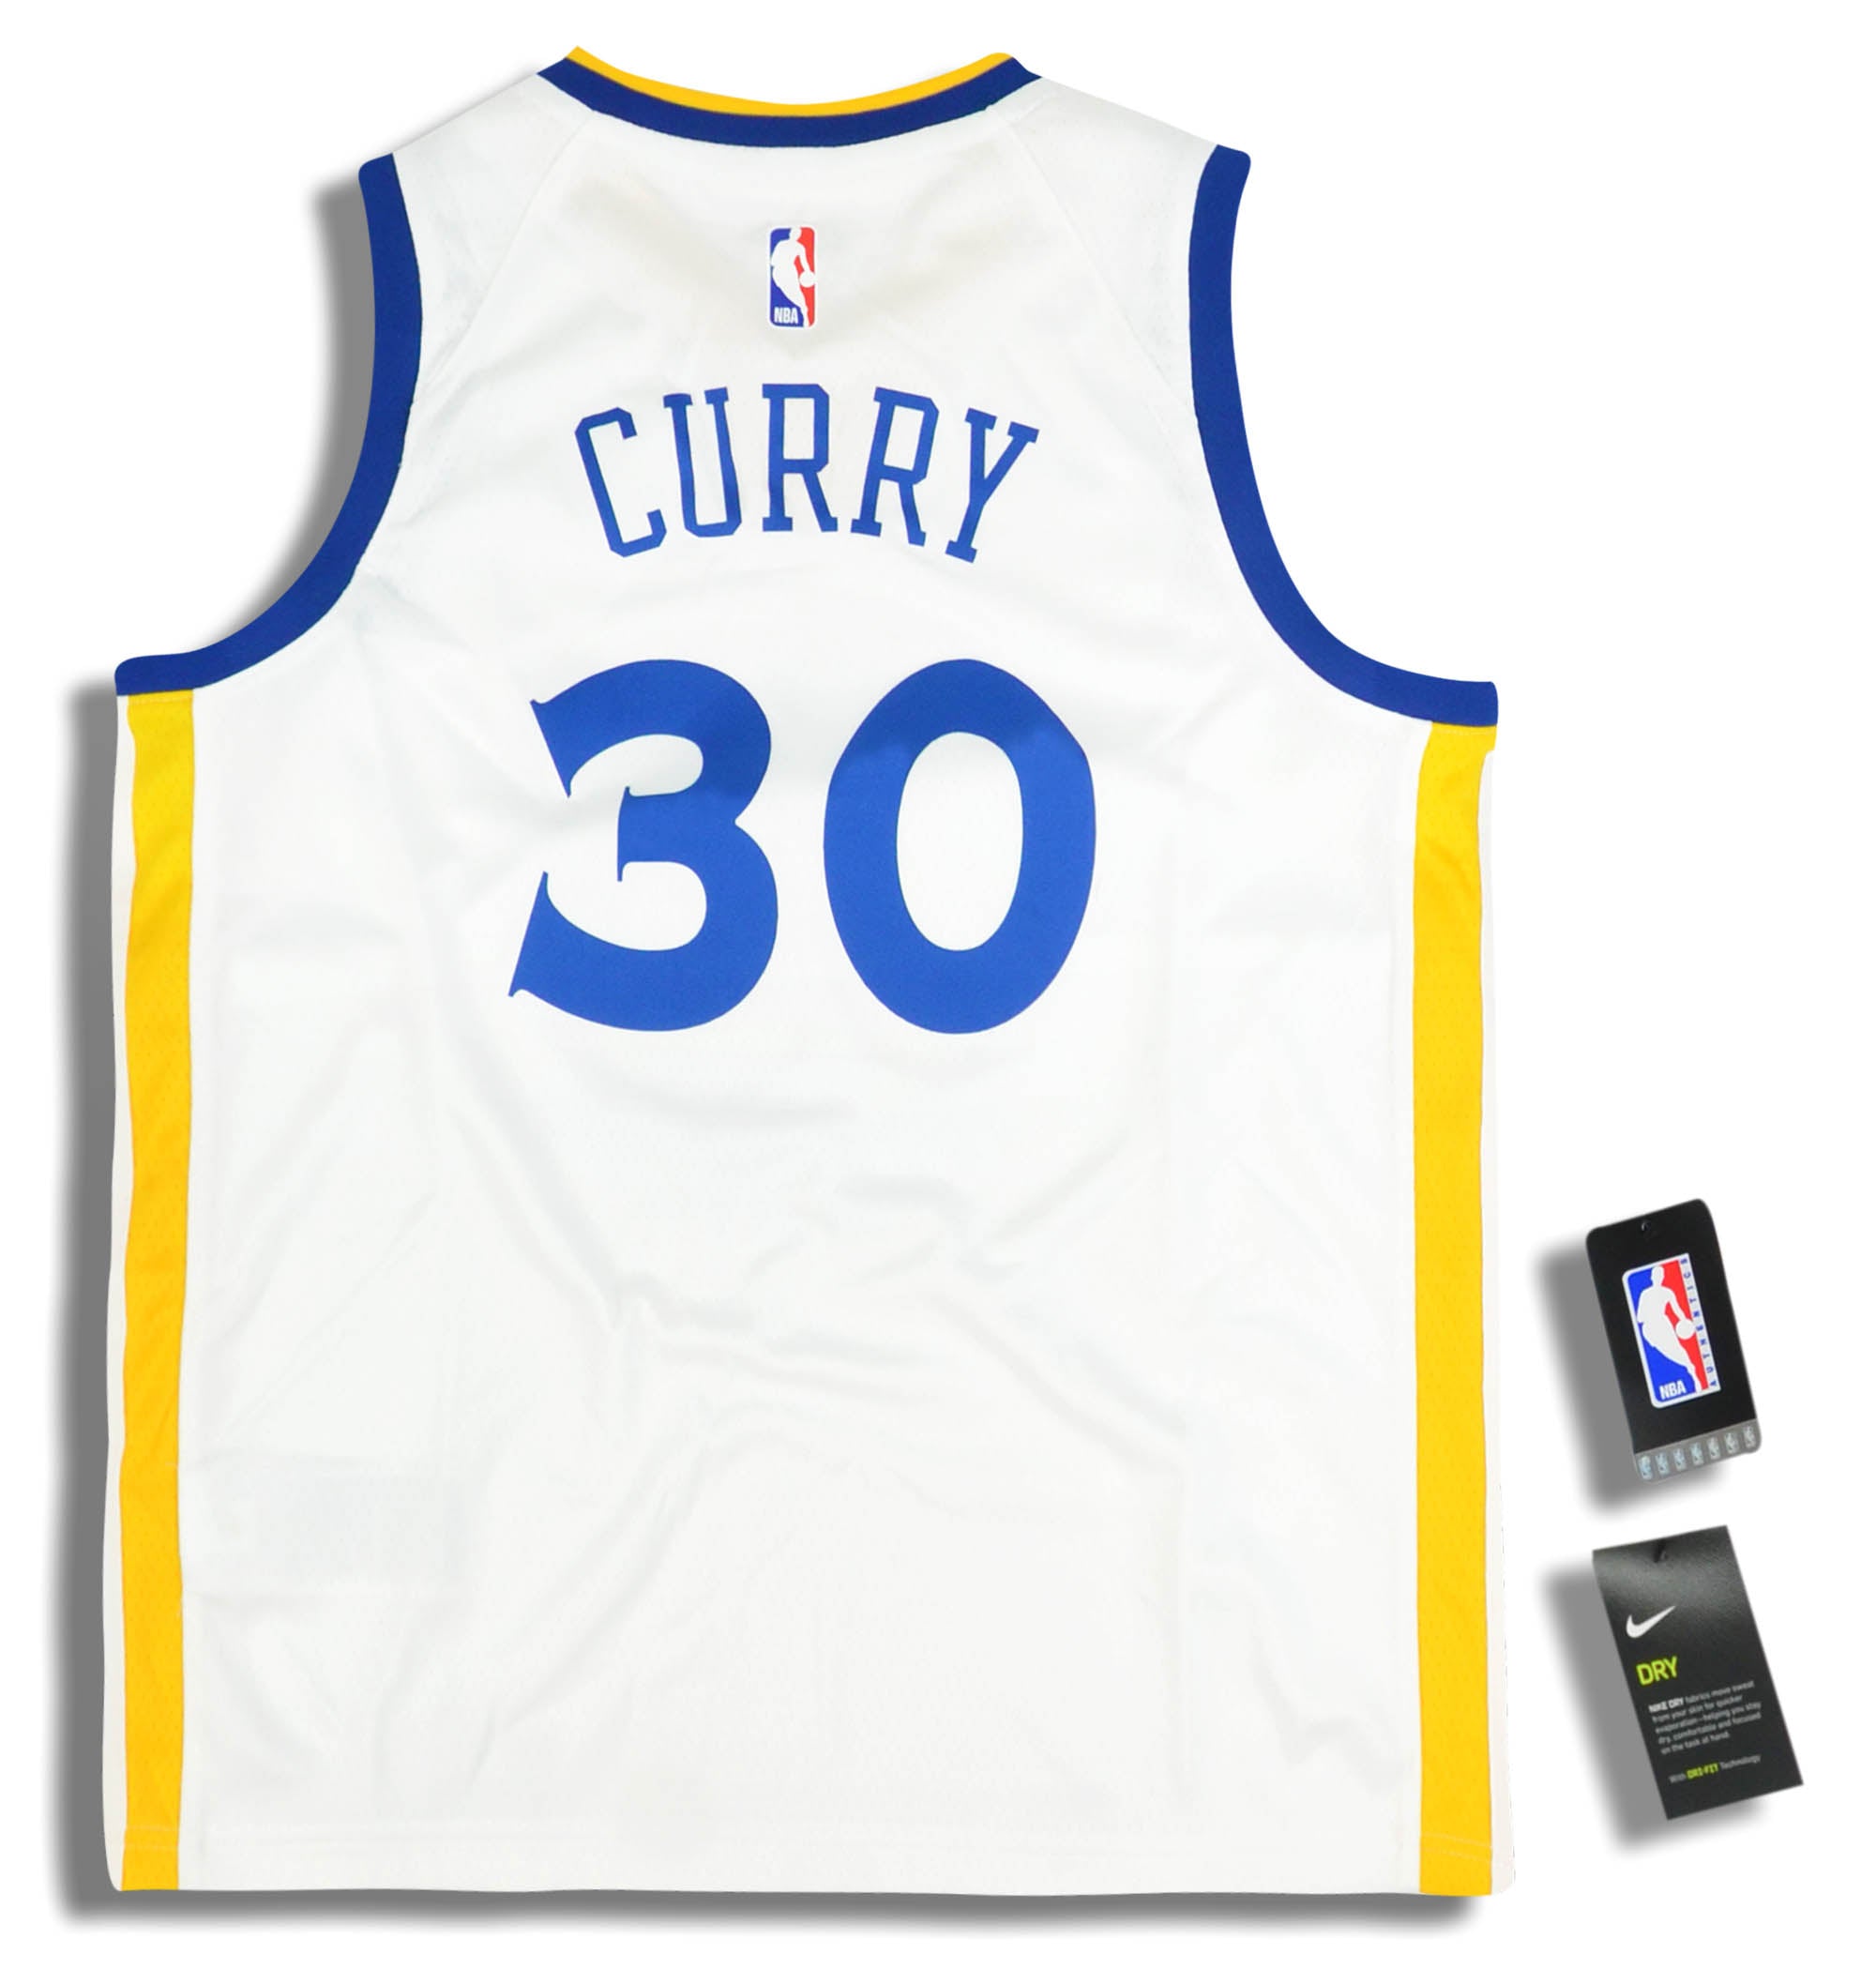 2018-19 GOLDEN STATE WARRIORS CURRY #30 NIKE SWINGMAN JERSEY (HOME) Y - W/TAGS